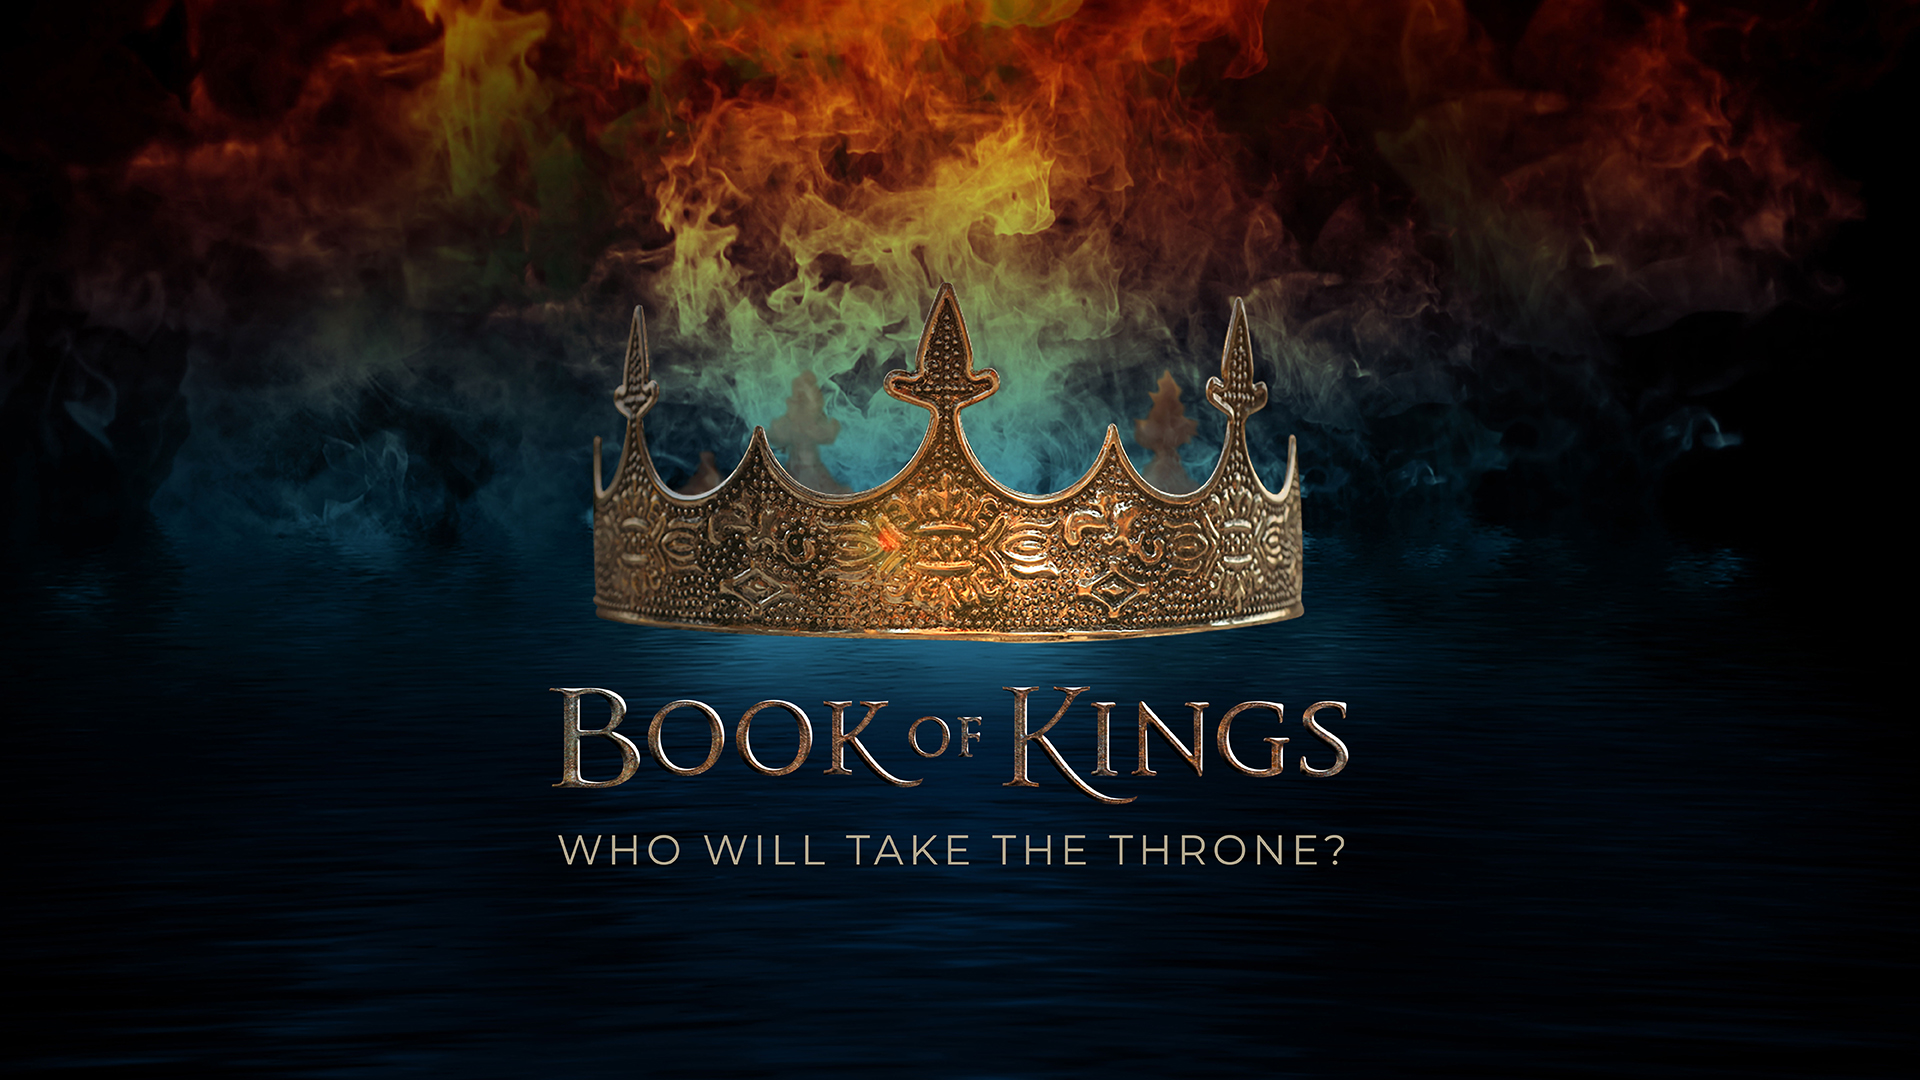 Book of Kings: Who Will Take the Throne?
September 11–October 9 & October 30–November 13
9:00 & 10:45 a.m.  | Oak Brook
10:00 a.m. | Butterfield
